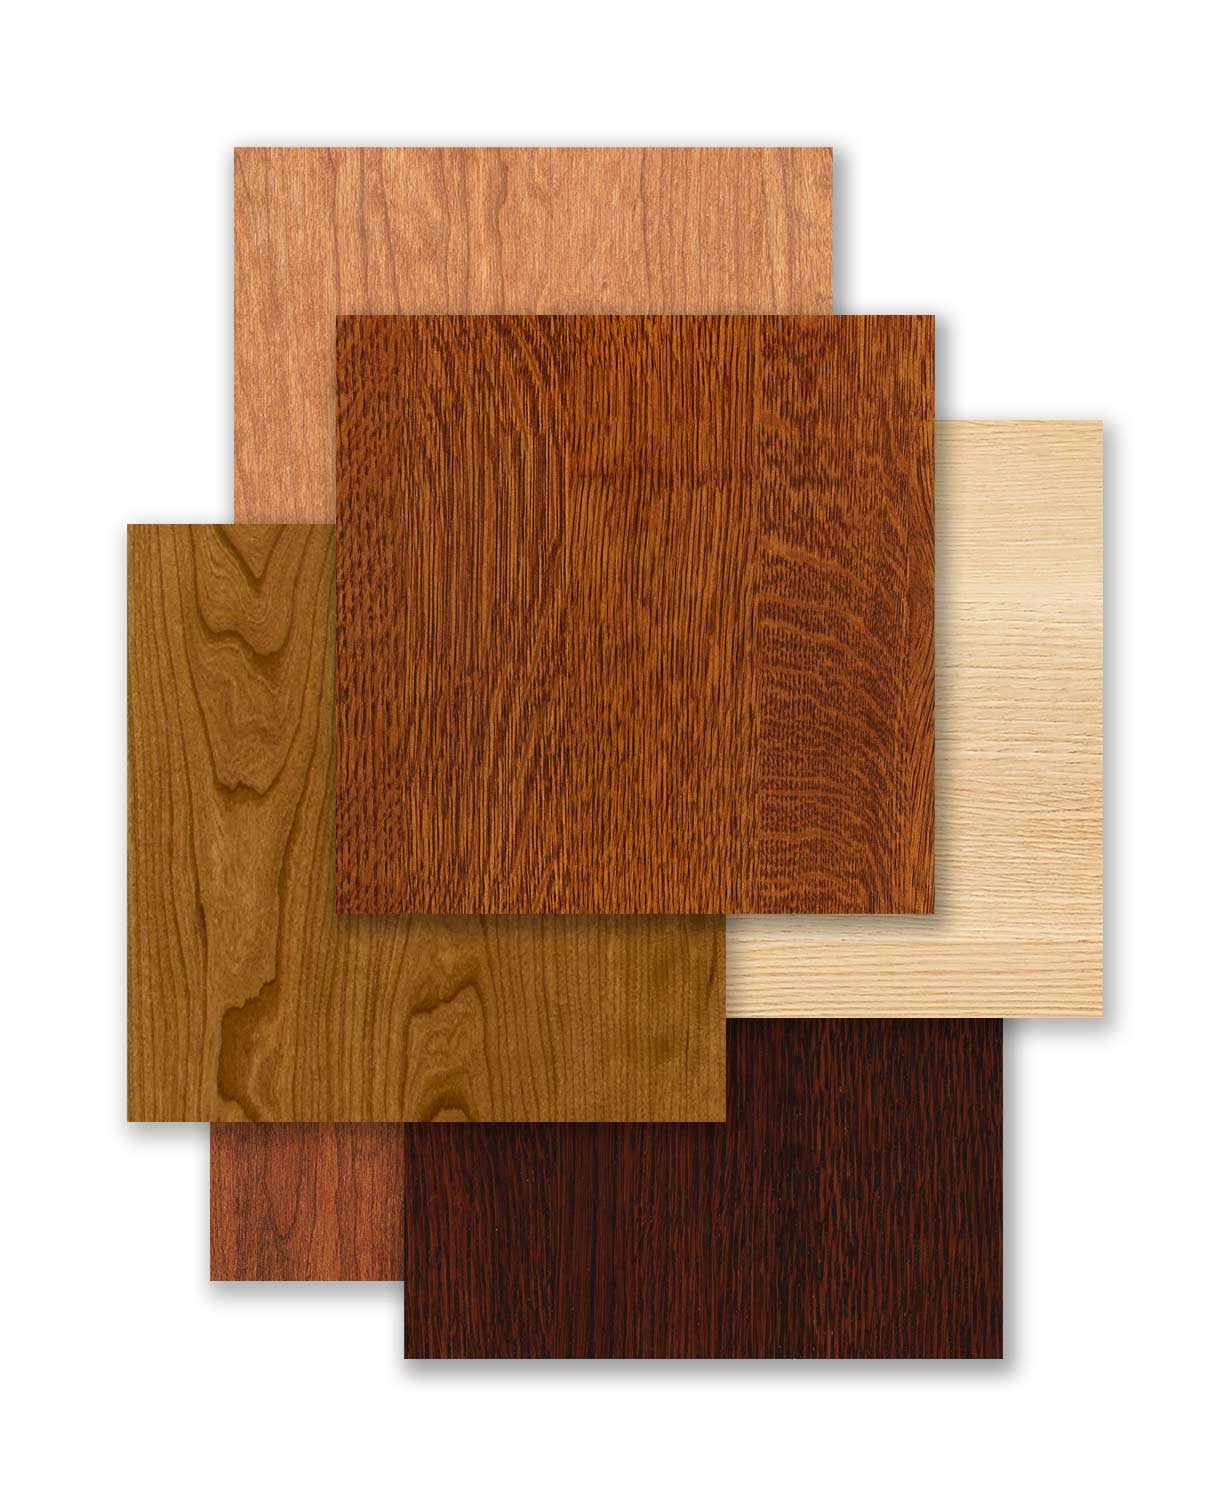 Swatch examples of Mission oak and cherry finish options